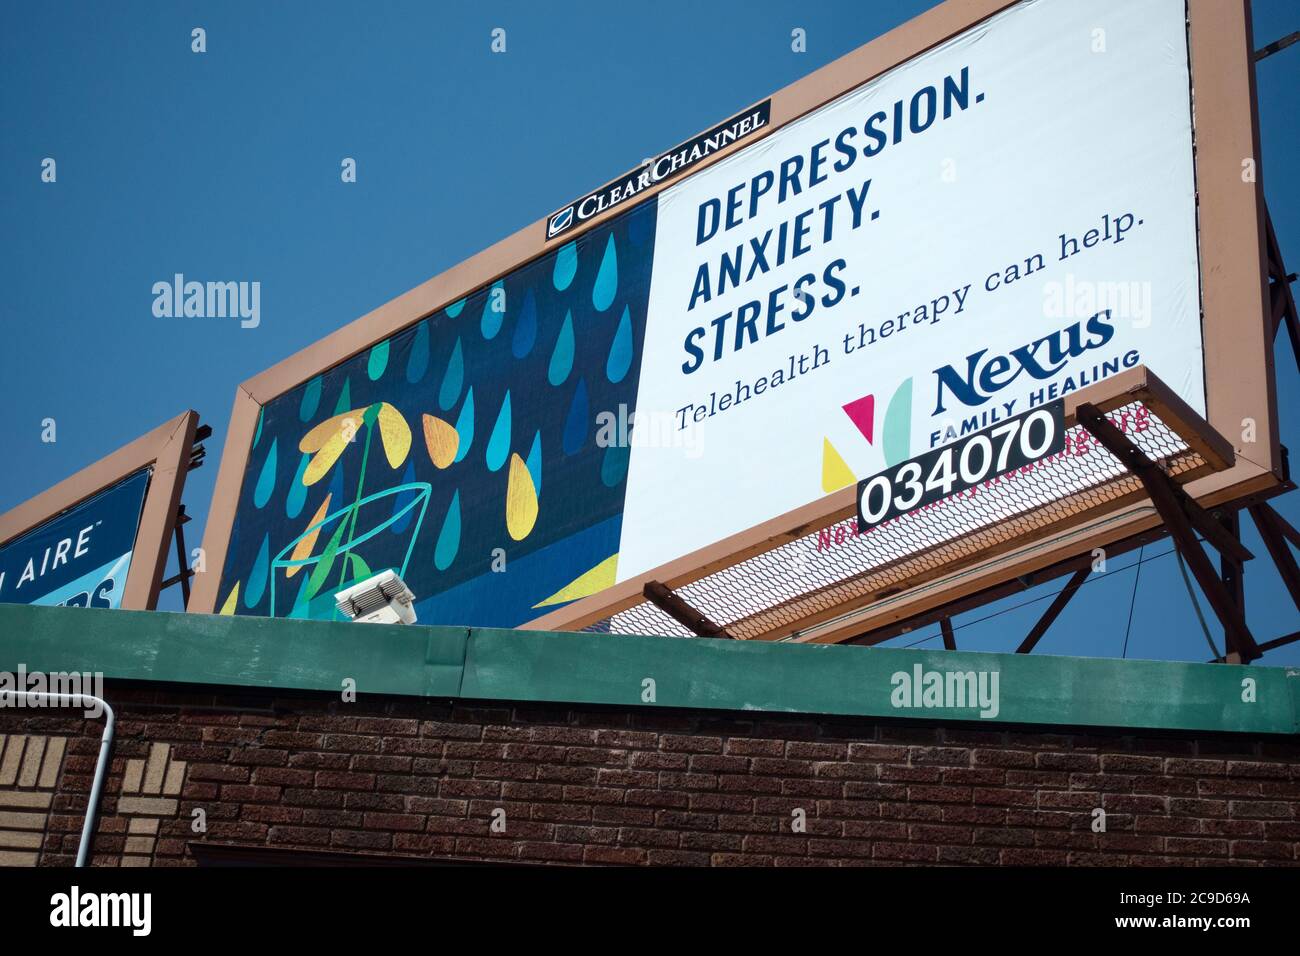 Billboard advocating telehealth therapy for depression, anxiety and stress. St Paul Minnesota MN USA Stock Photo